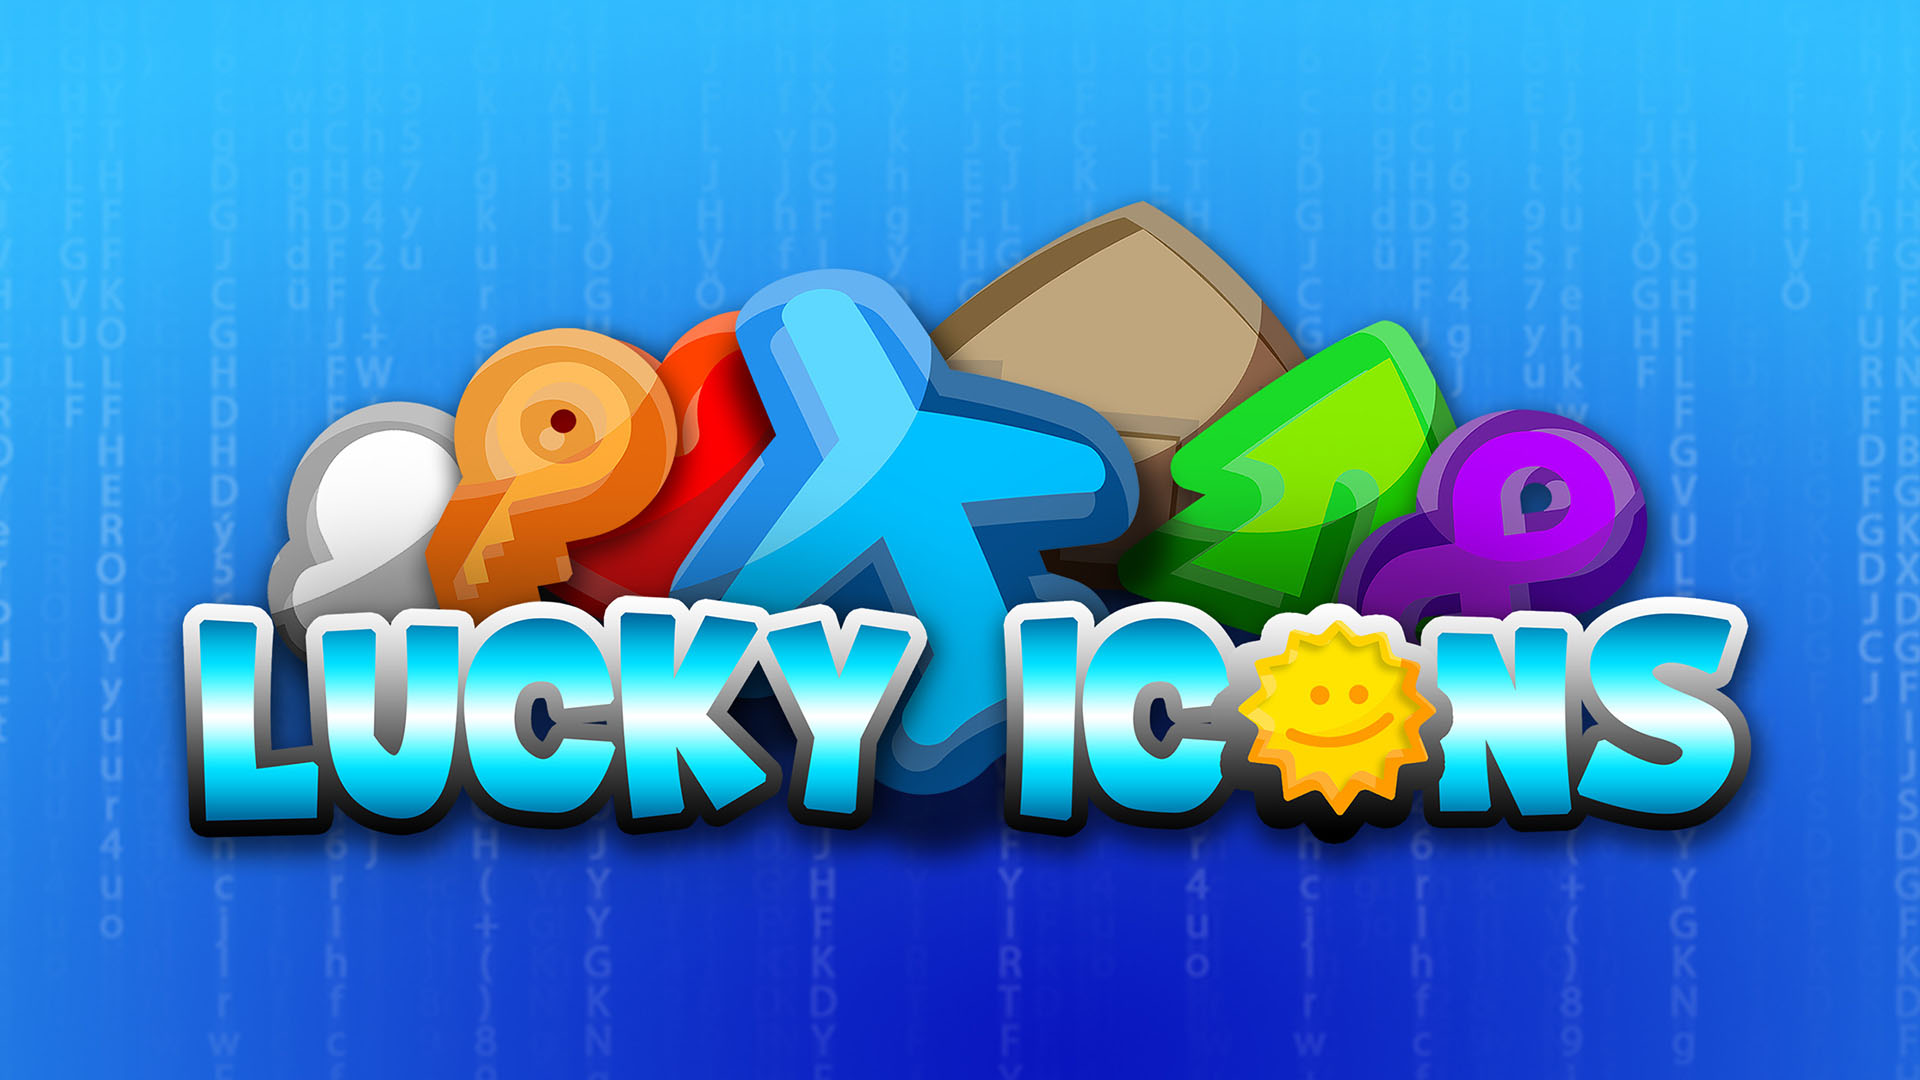 Lucky icons